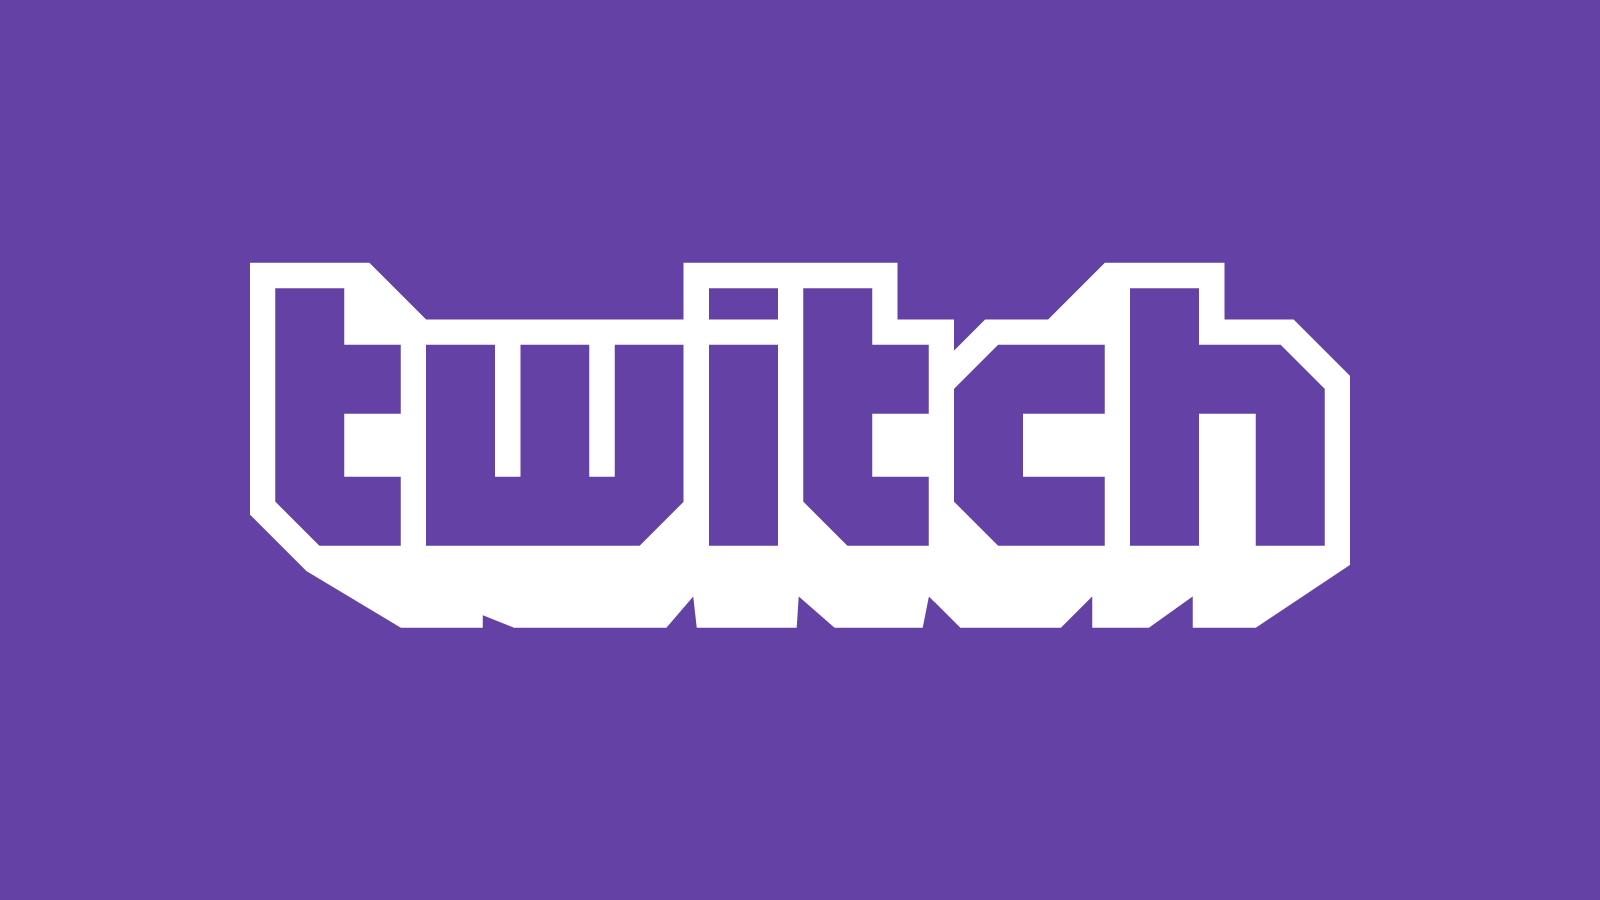 How to Obtain OAuth Token For Twitch Helix API